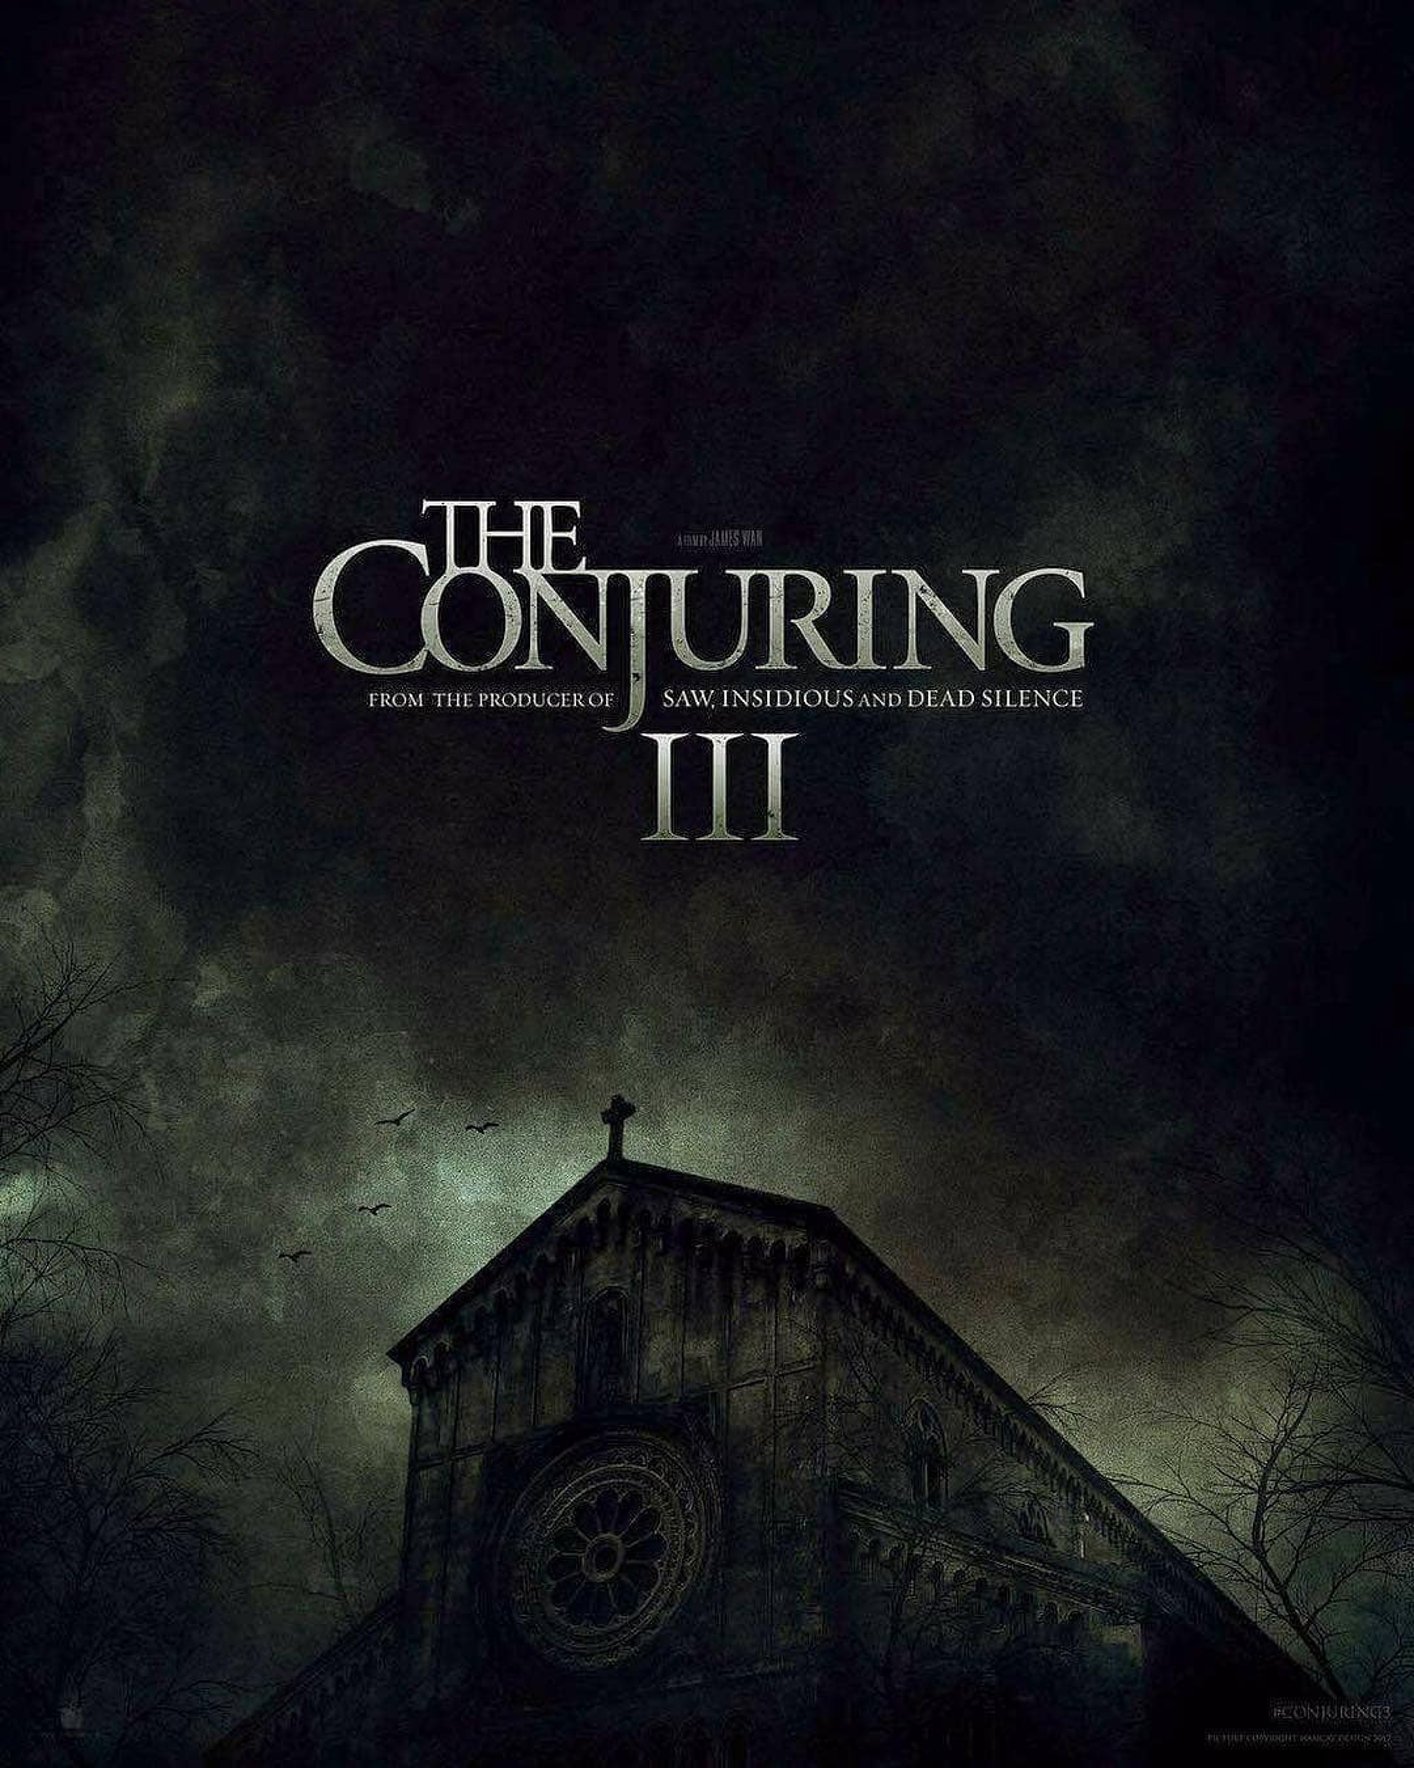 The Conjuring 3 Casting for Movers, Neighbors Washing Cars & Taxi Drivers